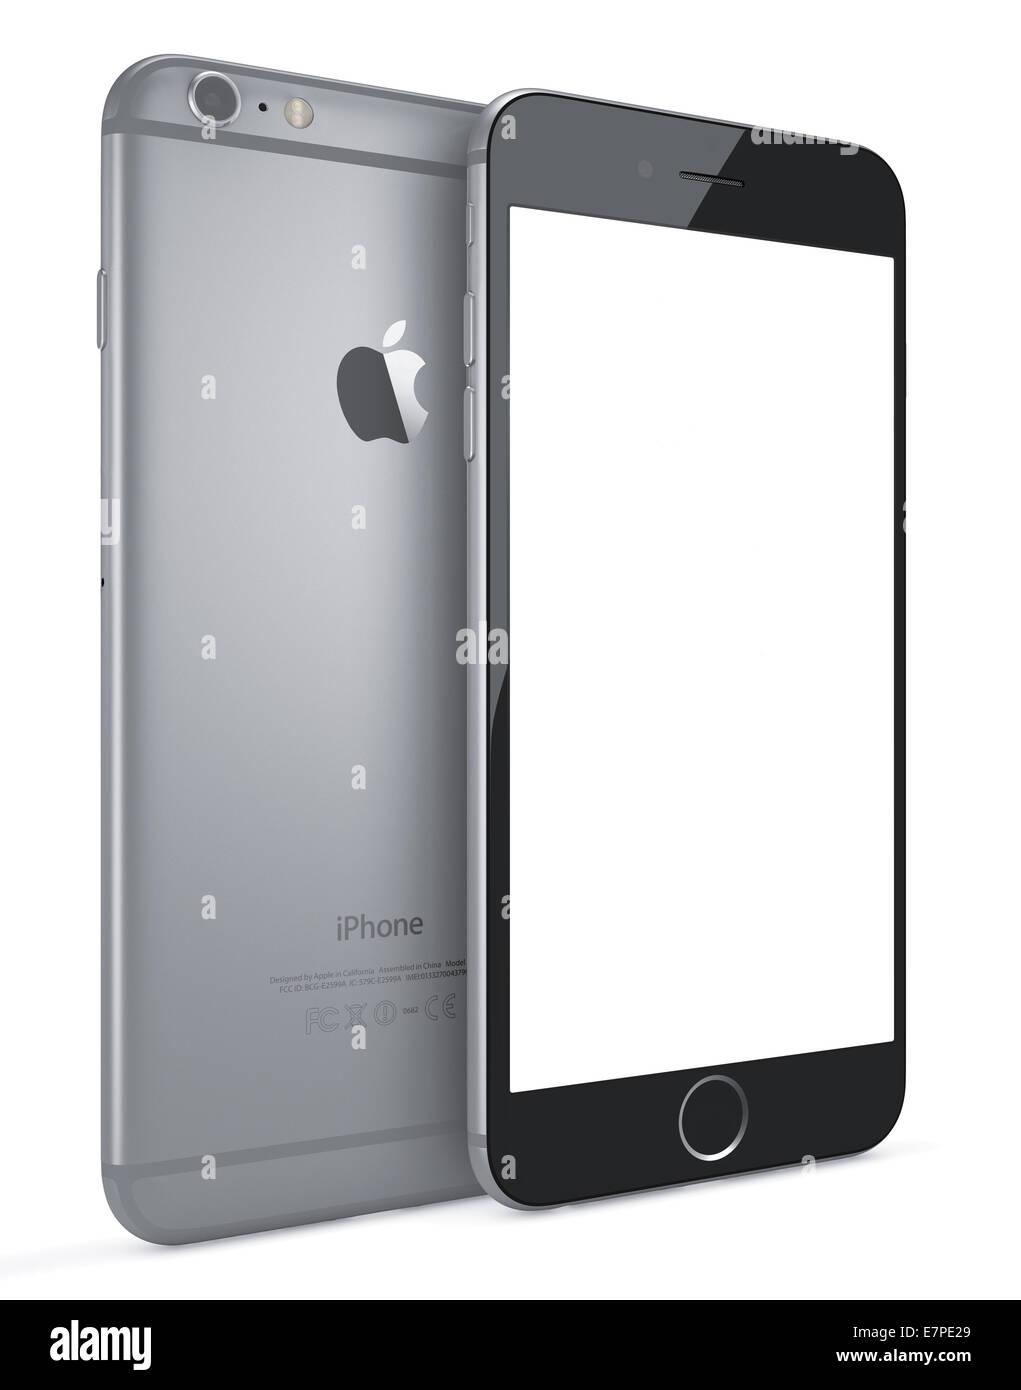 Apple Space Gray iPhone 6 Plus with blank screen Stock Photo